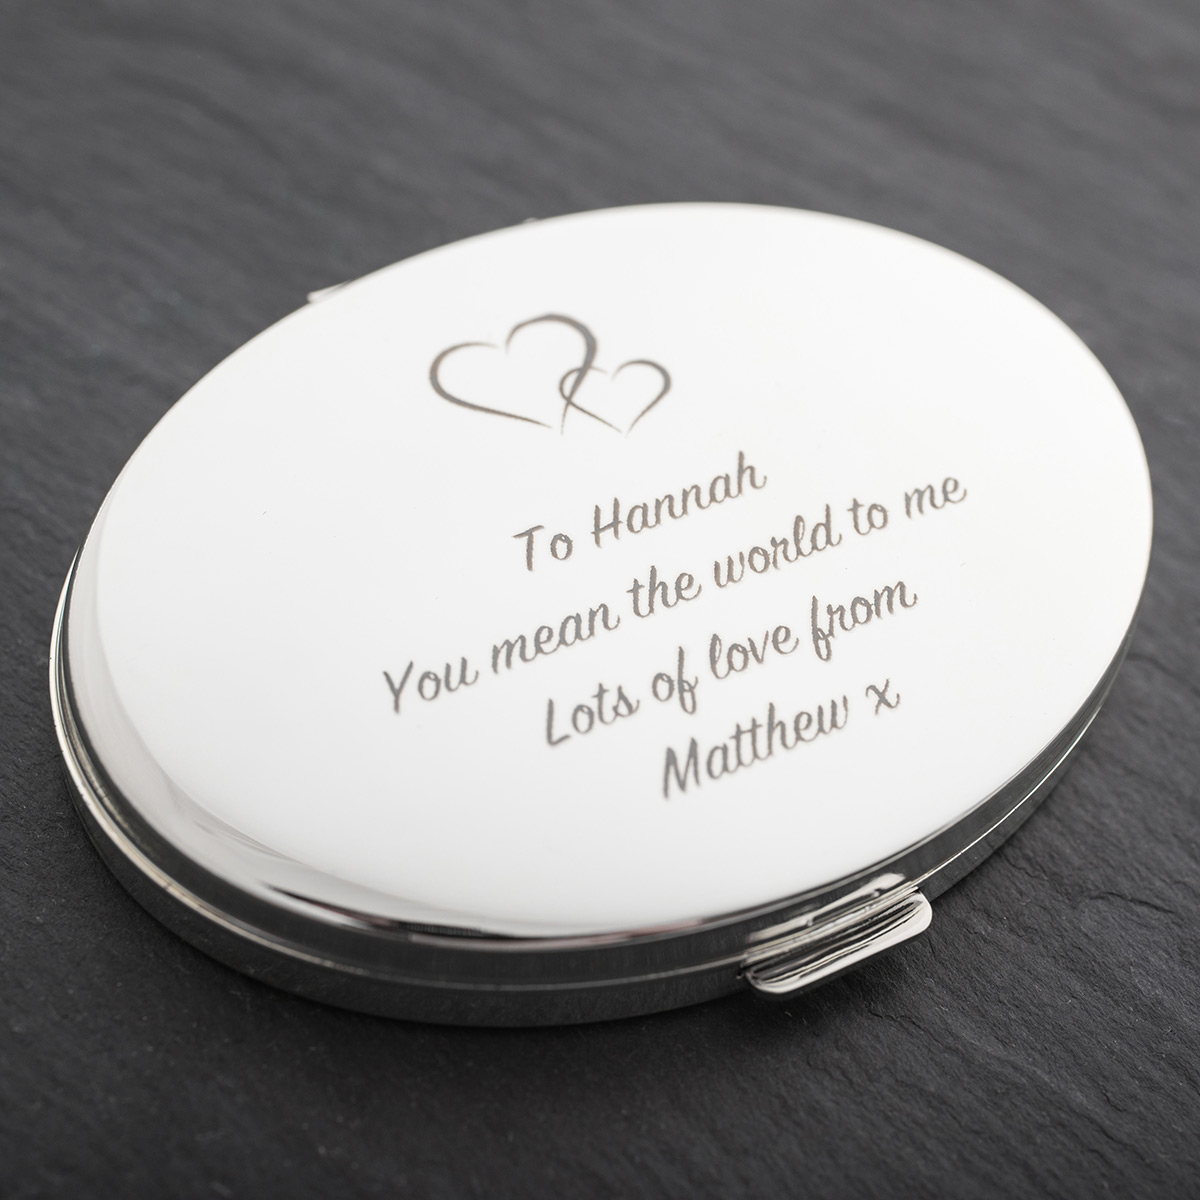 Personalised Engraved Silver Oval Compact Mirror With Hearts